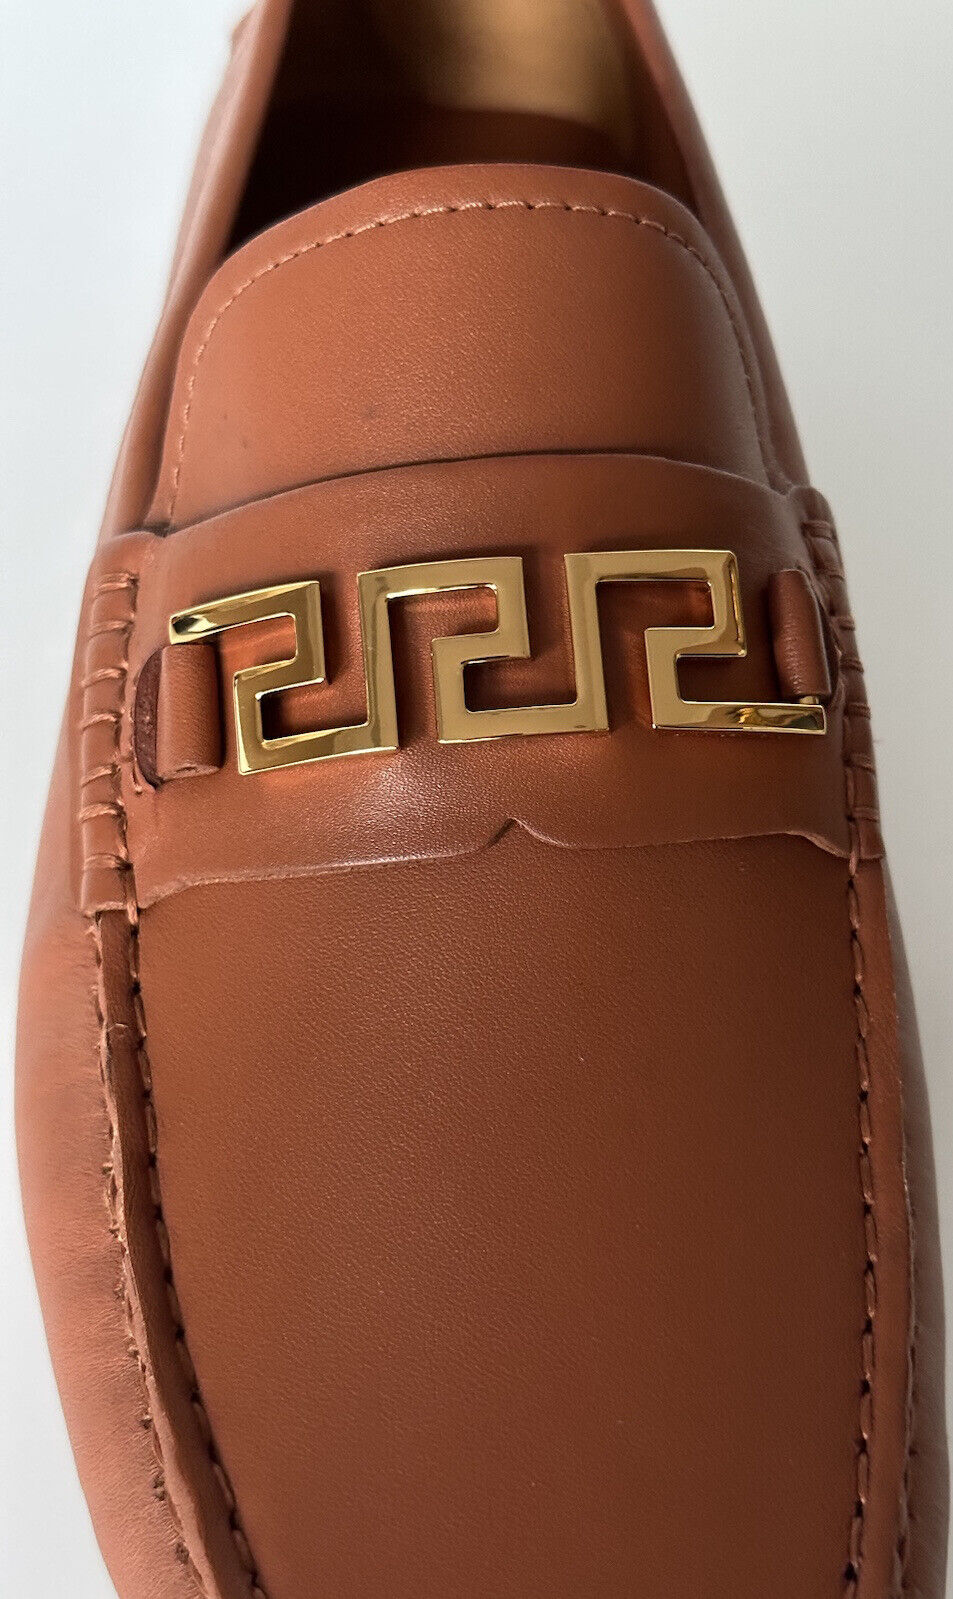 New $800 VERSACE Men's Brown Calf Leather Driver Shoes 10 US (43 Euro) 1006271